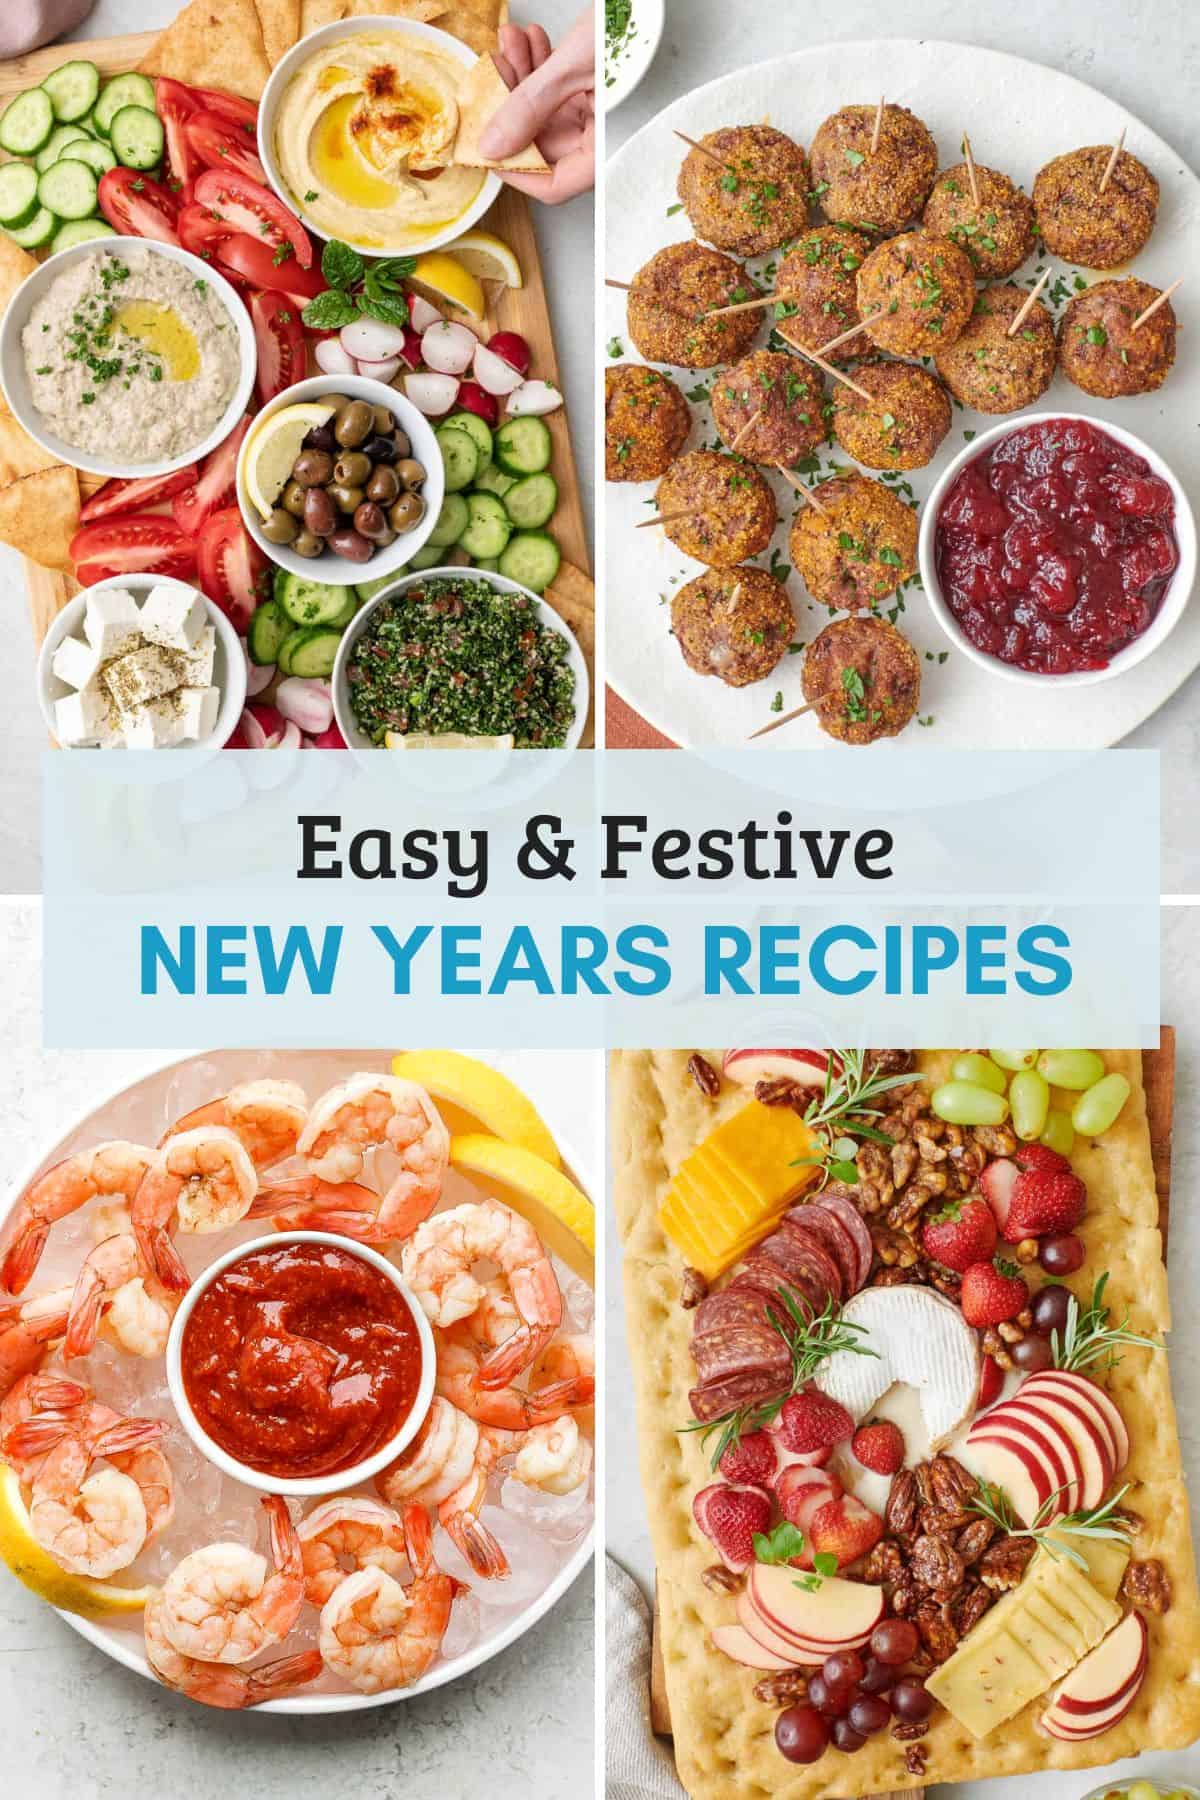 https://feelgoodfoodie.net/wp-content/uploads/2023/04/RoundUp_New-Years-Recipes-Featured.jpg